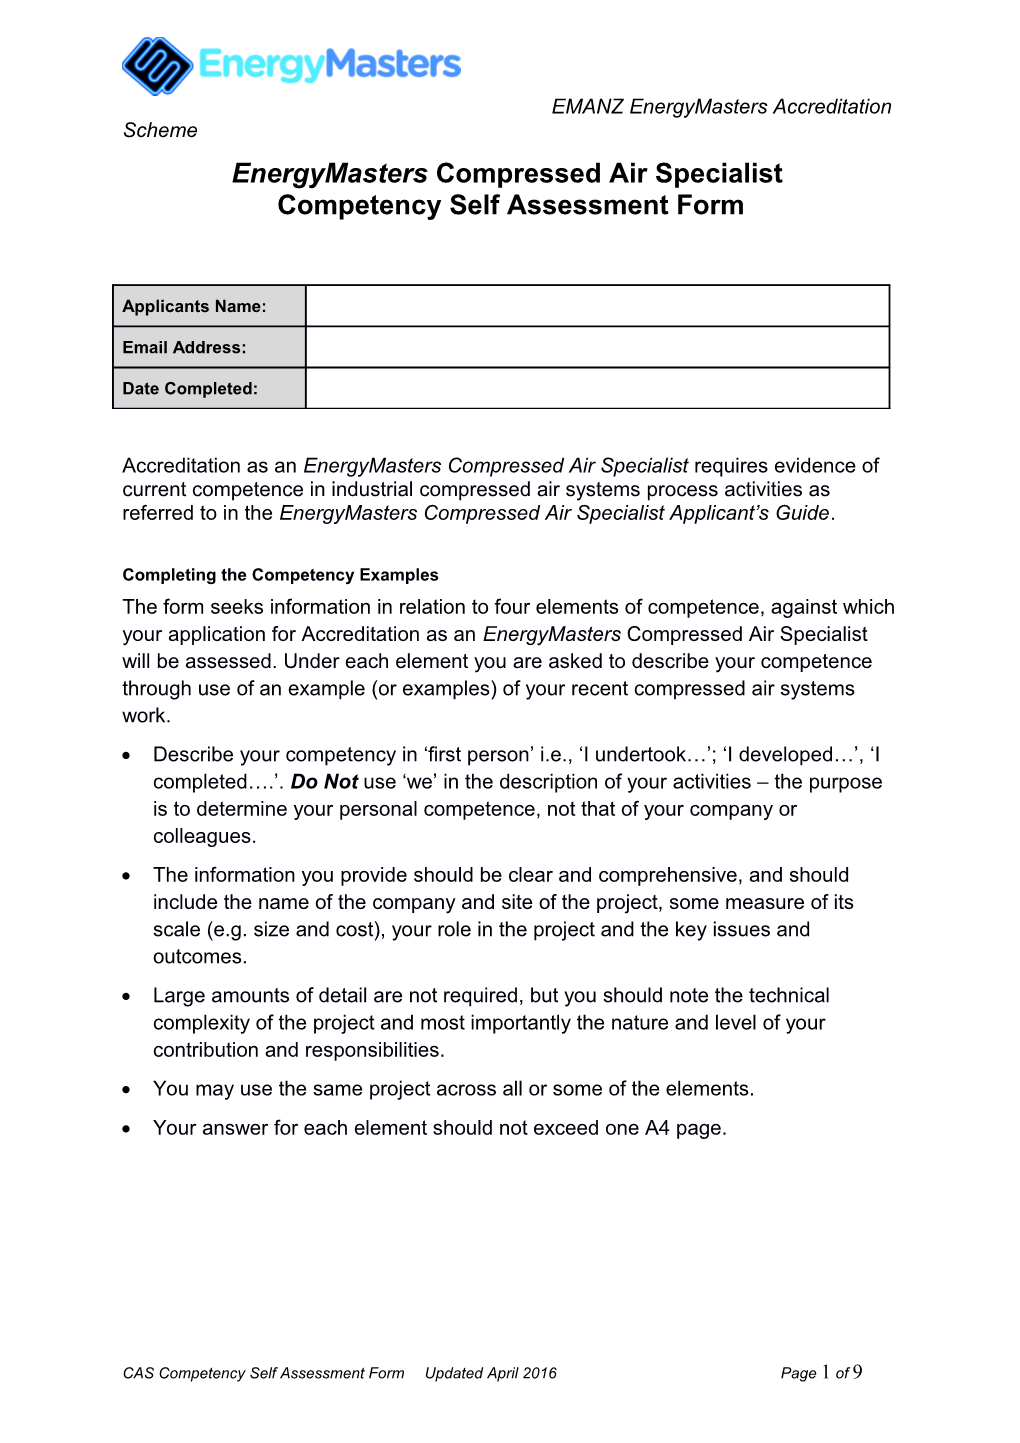 Energymasters Compressed Air Specialist Competency Self Assessment Form